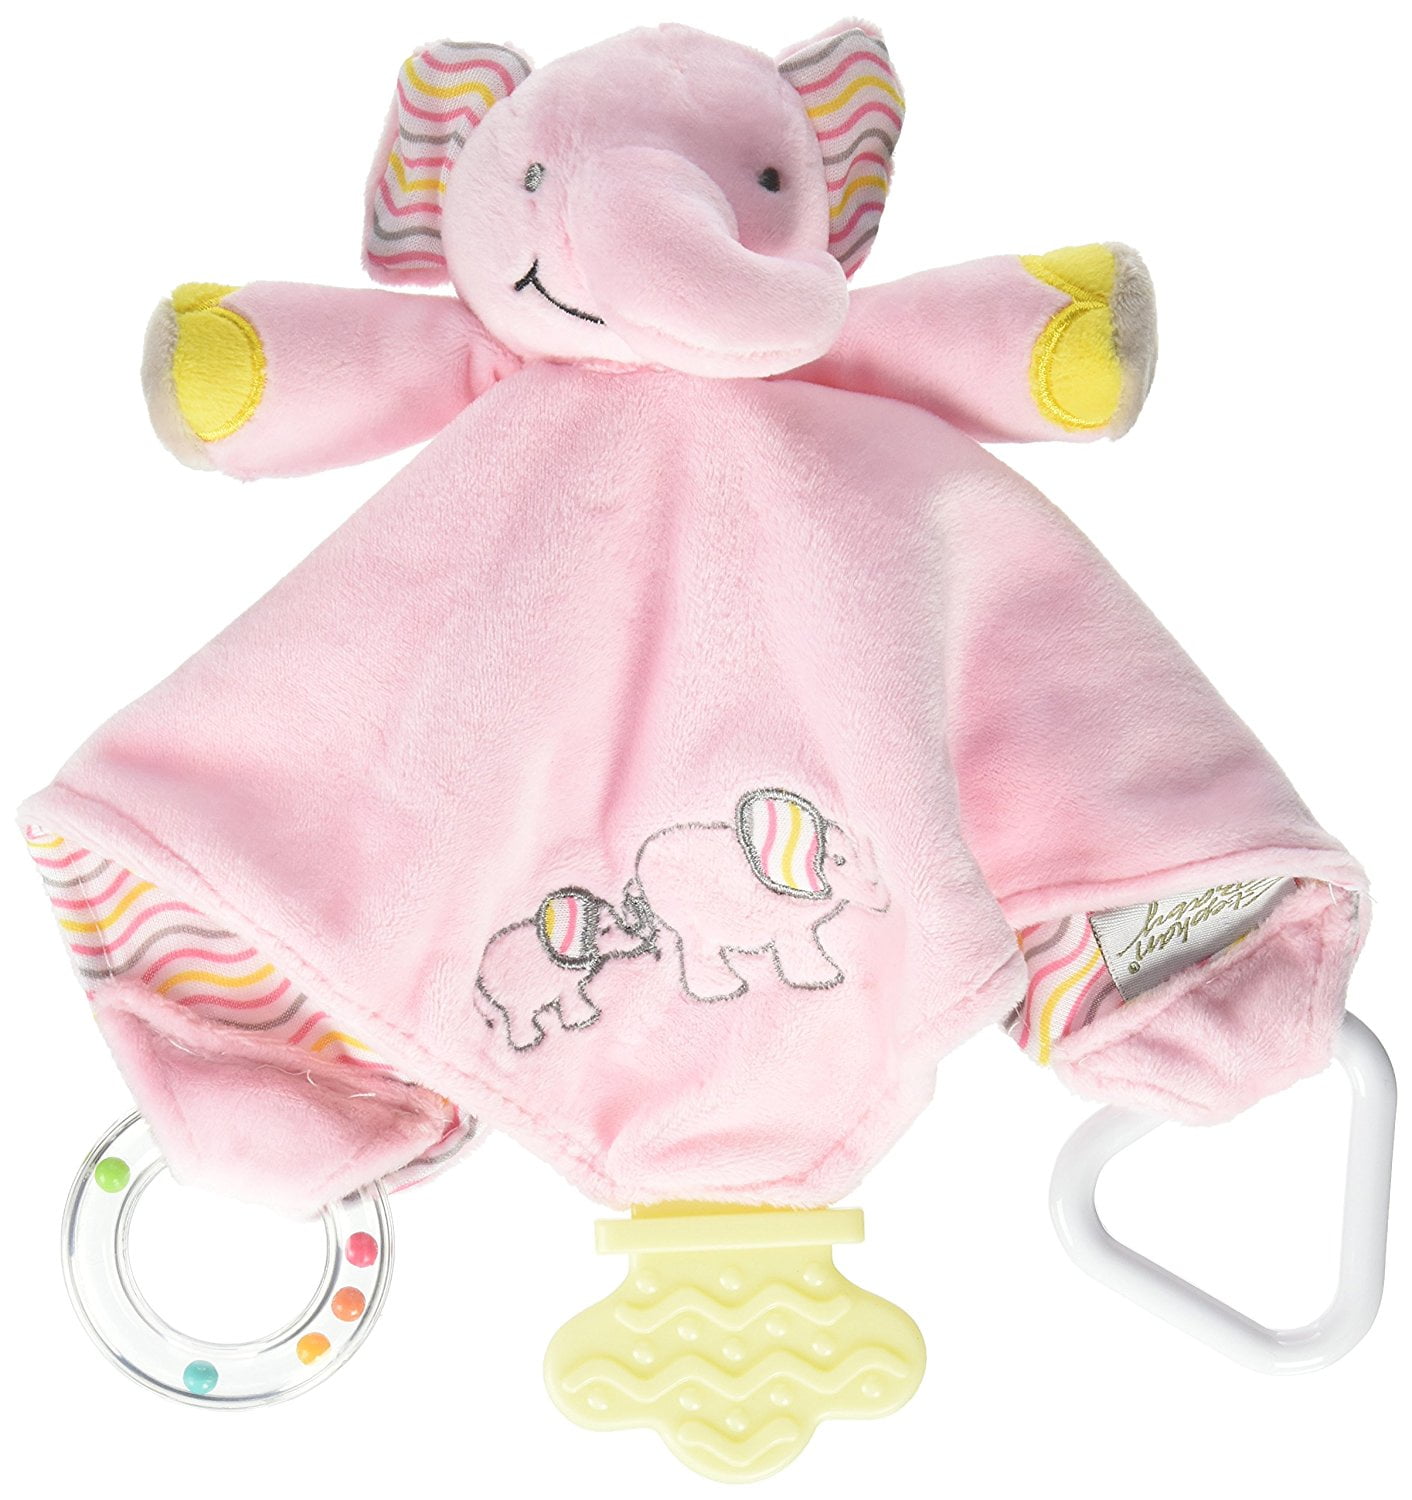 My First Elephant Pink Comfort Blanket with Rattle Soft Baby Newborn Security 